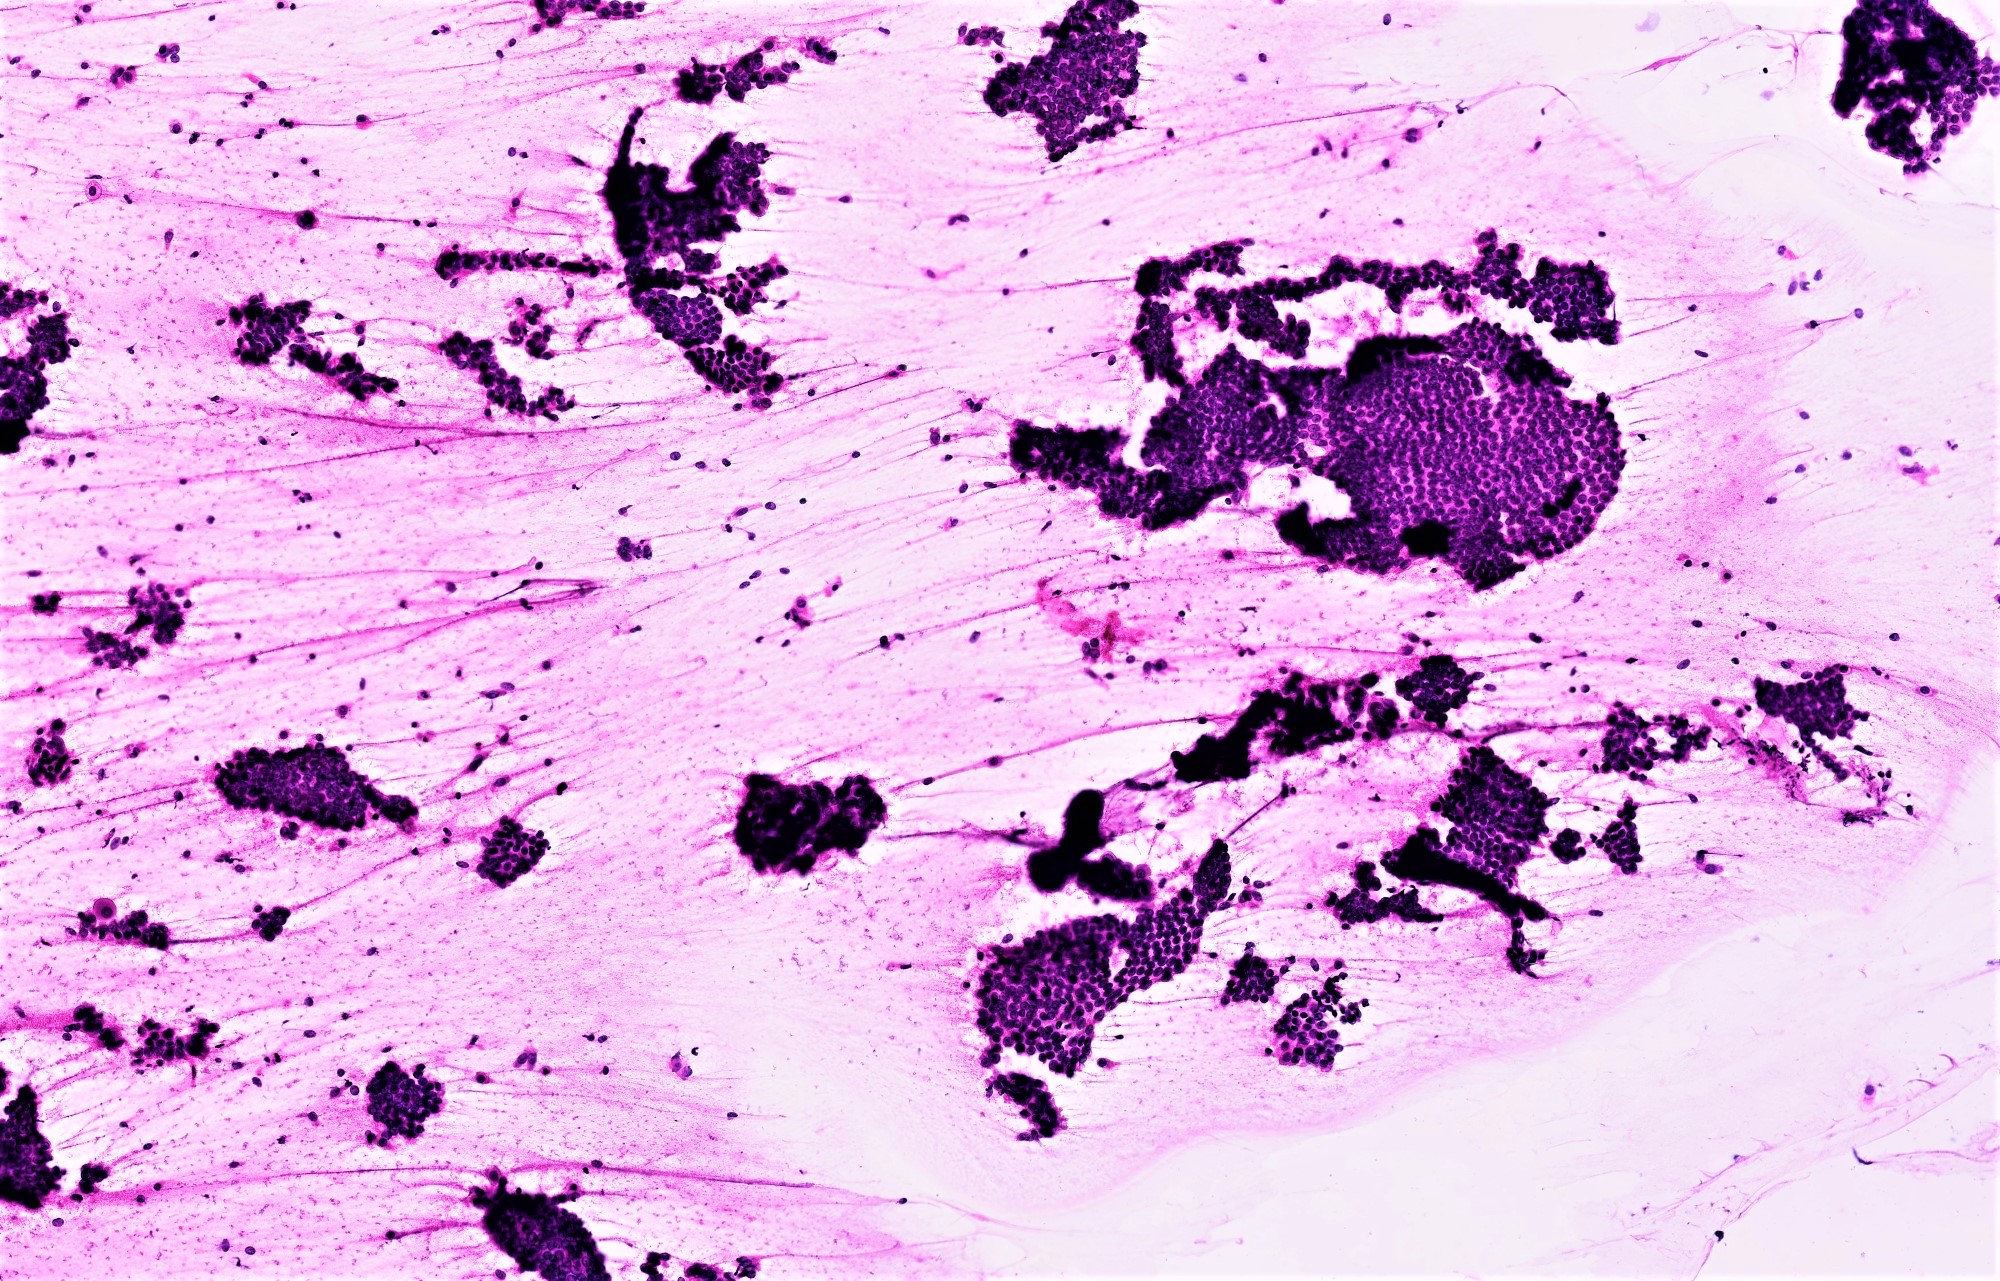 Clusters of cells with irregular contours